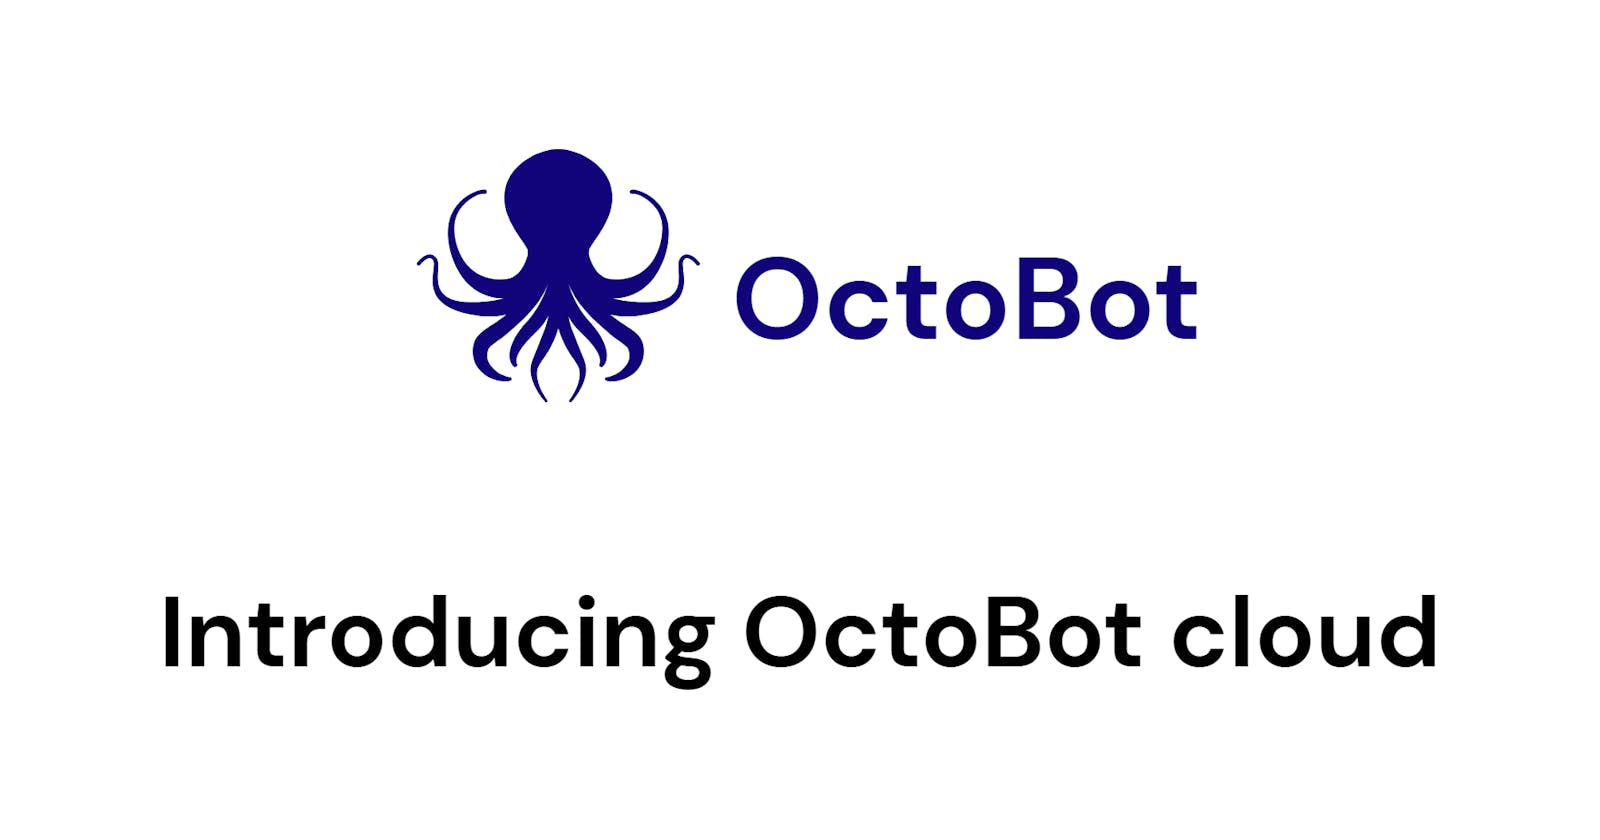 Introducing the new OctoBot cloud